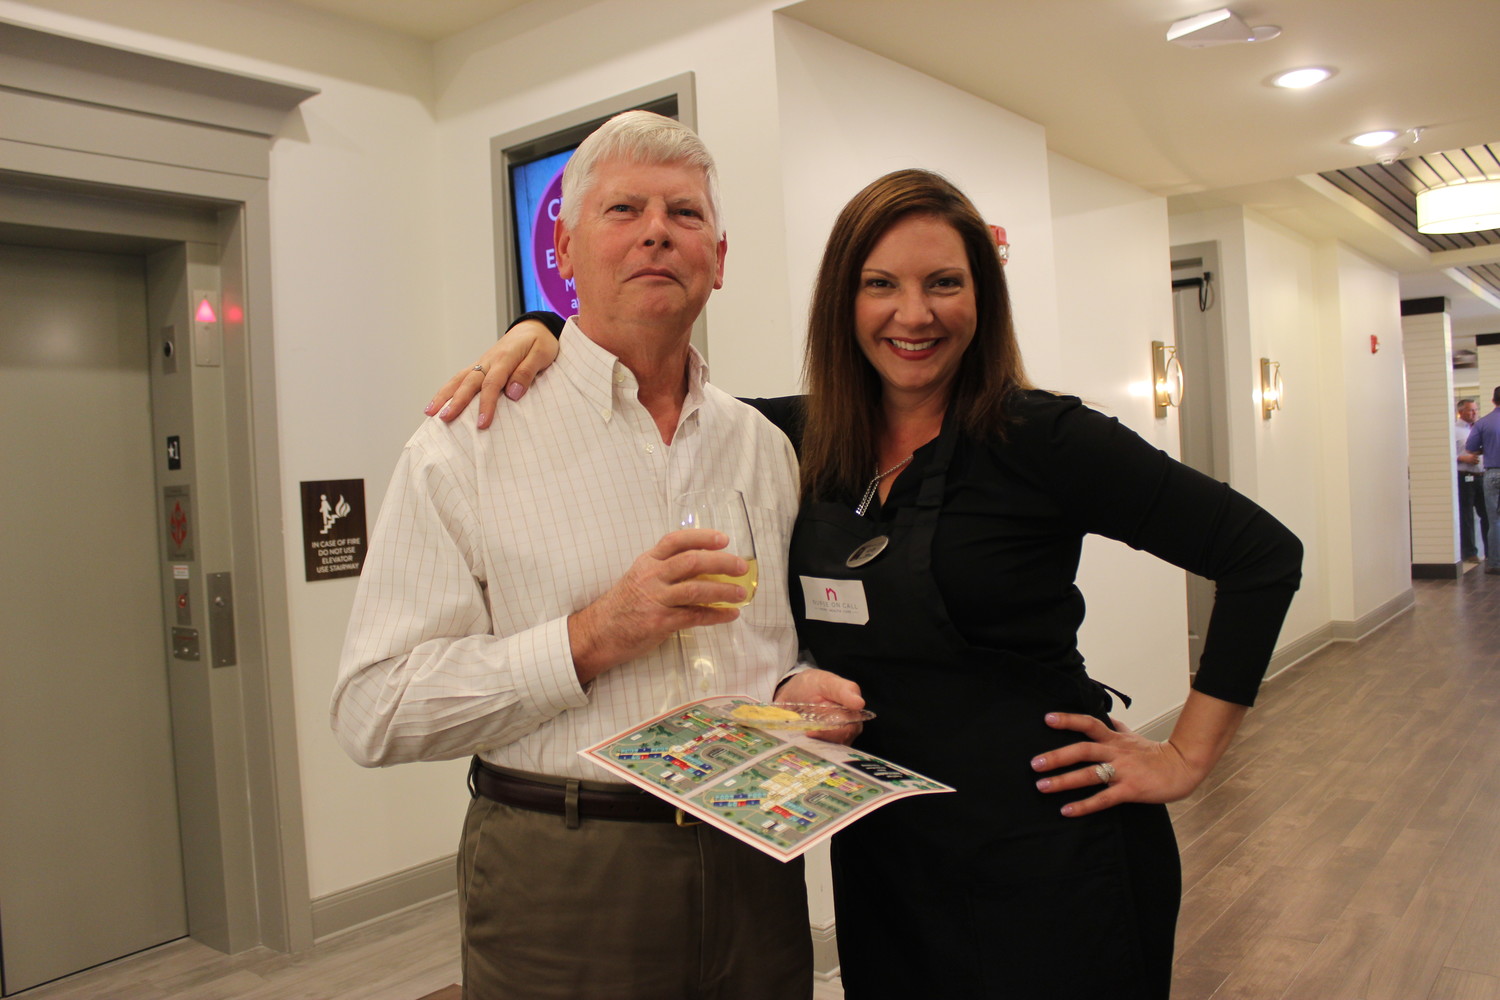 Rich Horvath and Kelly Bishop at the grand opening event